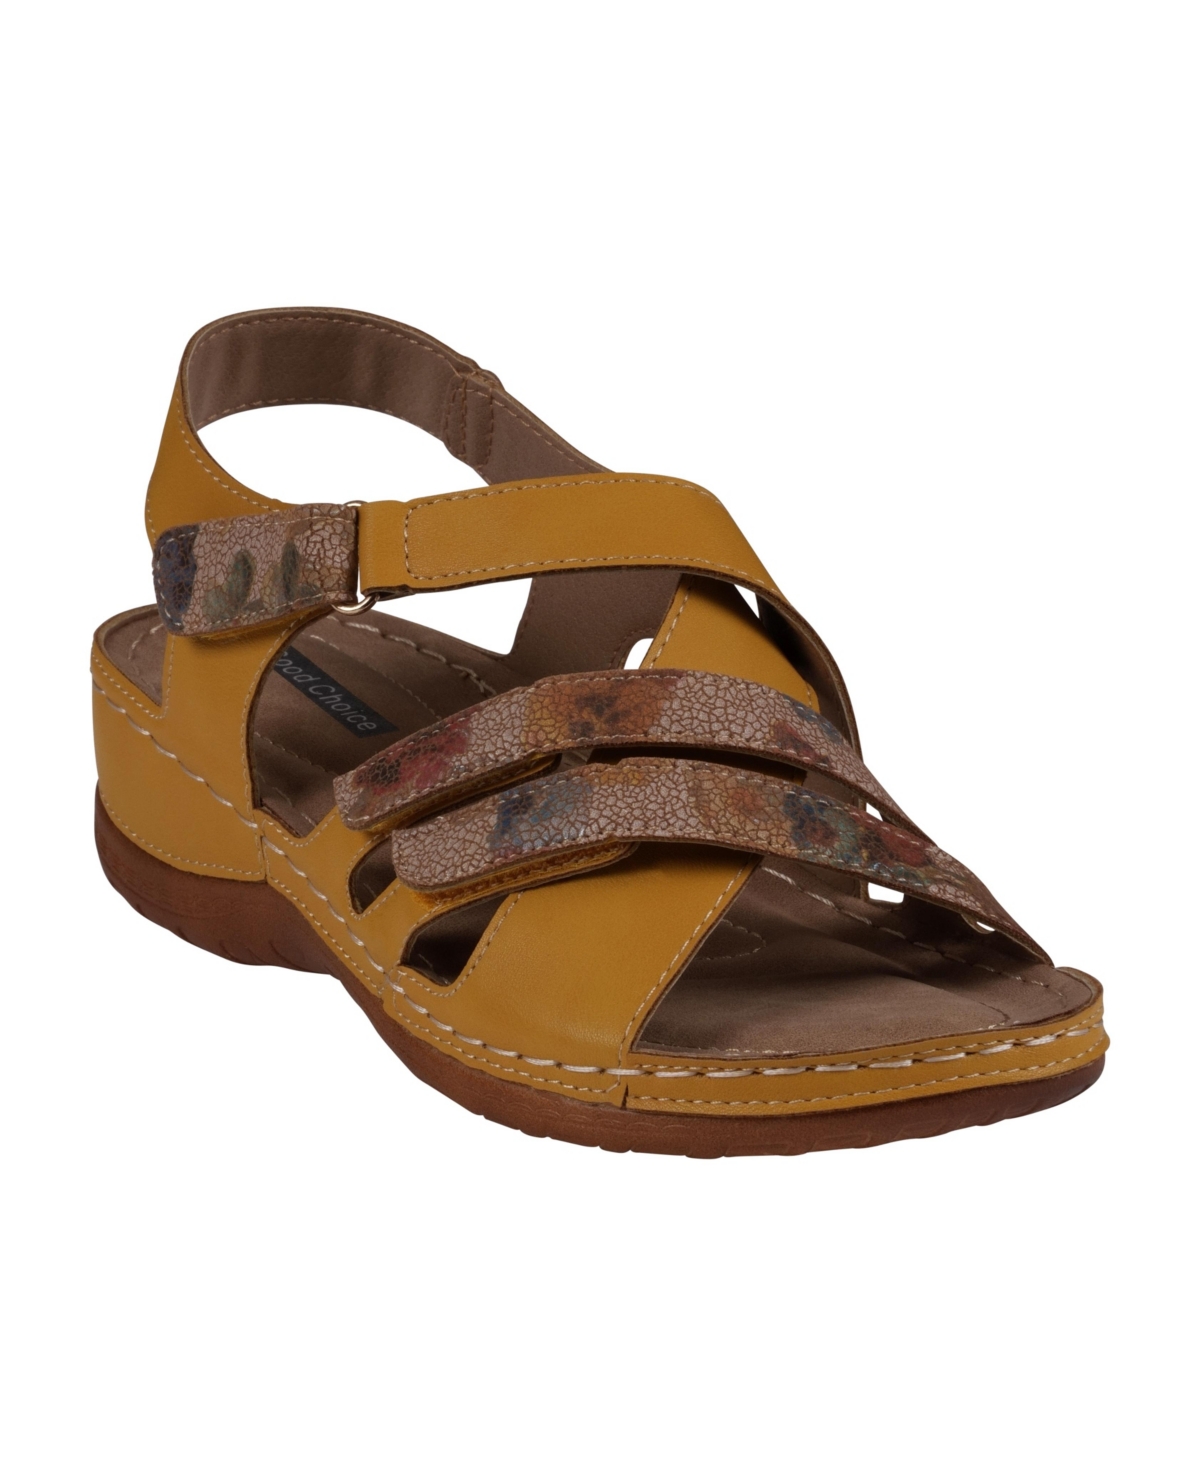 Women's Dalary Strappy Stay-Put Two-Tone Comfort Flat Sandals - Yellow